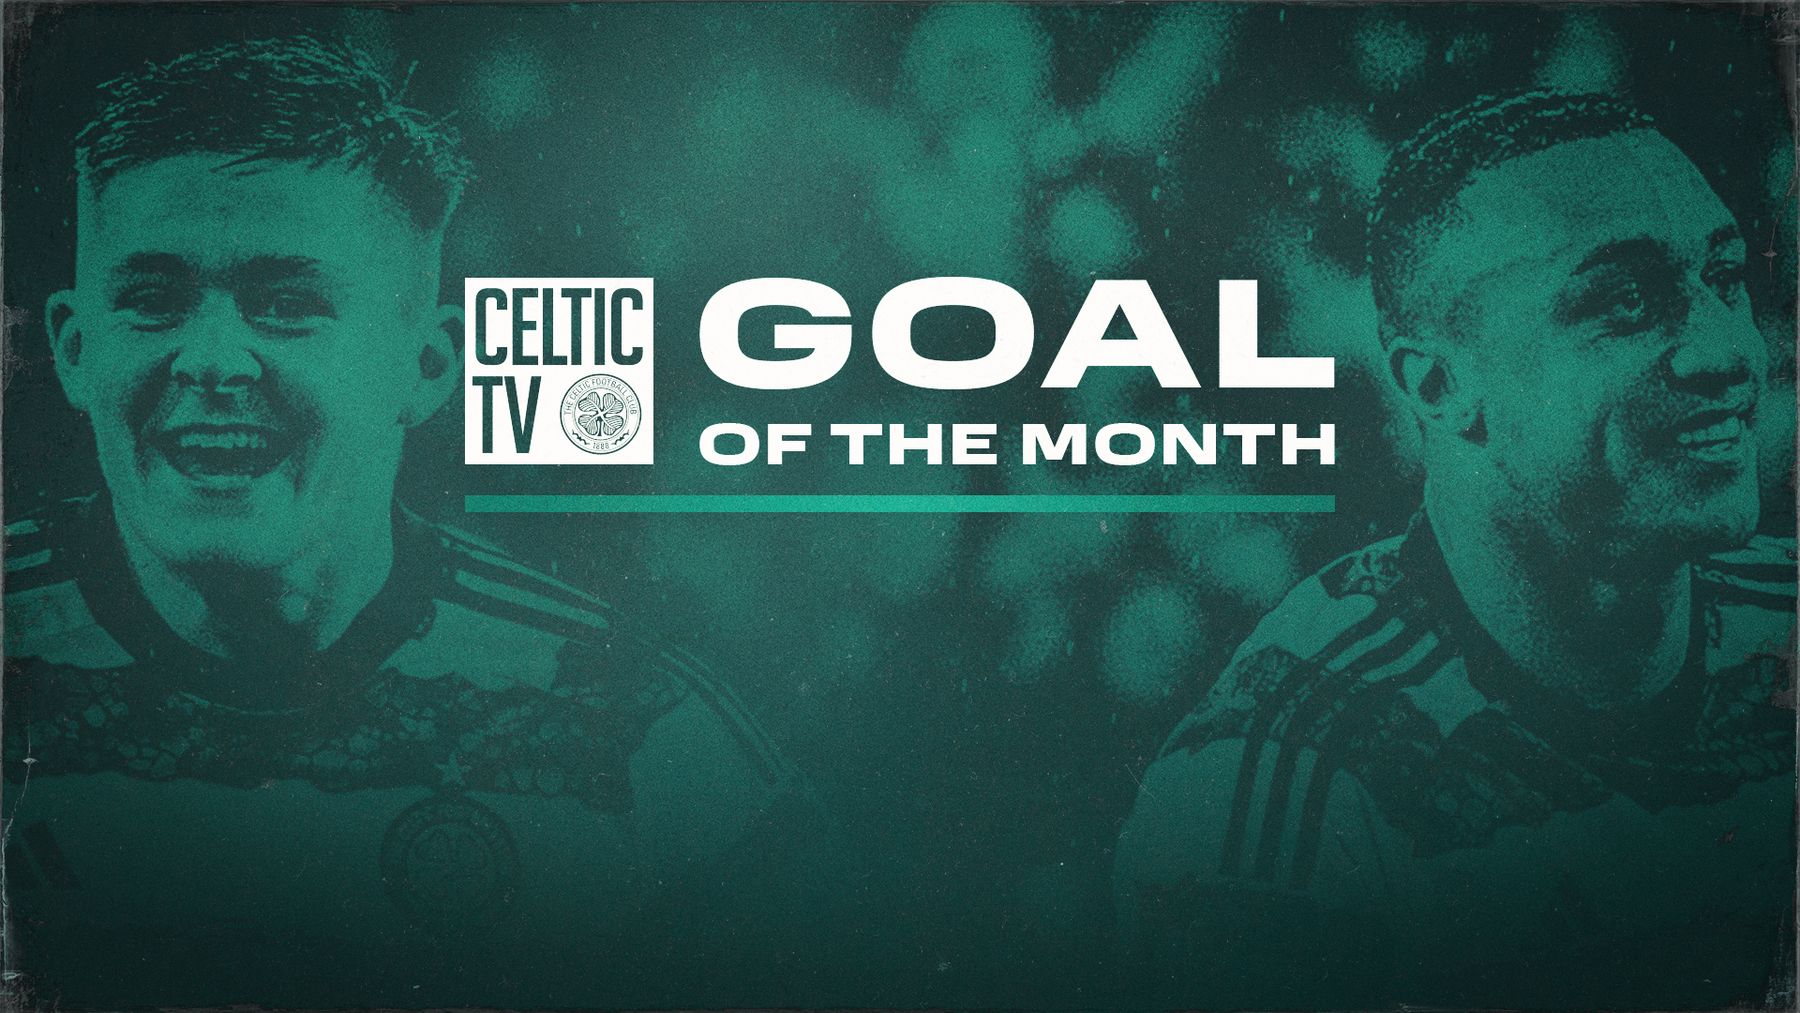 Vote now for Celtic TV’s February Goal of the Month award